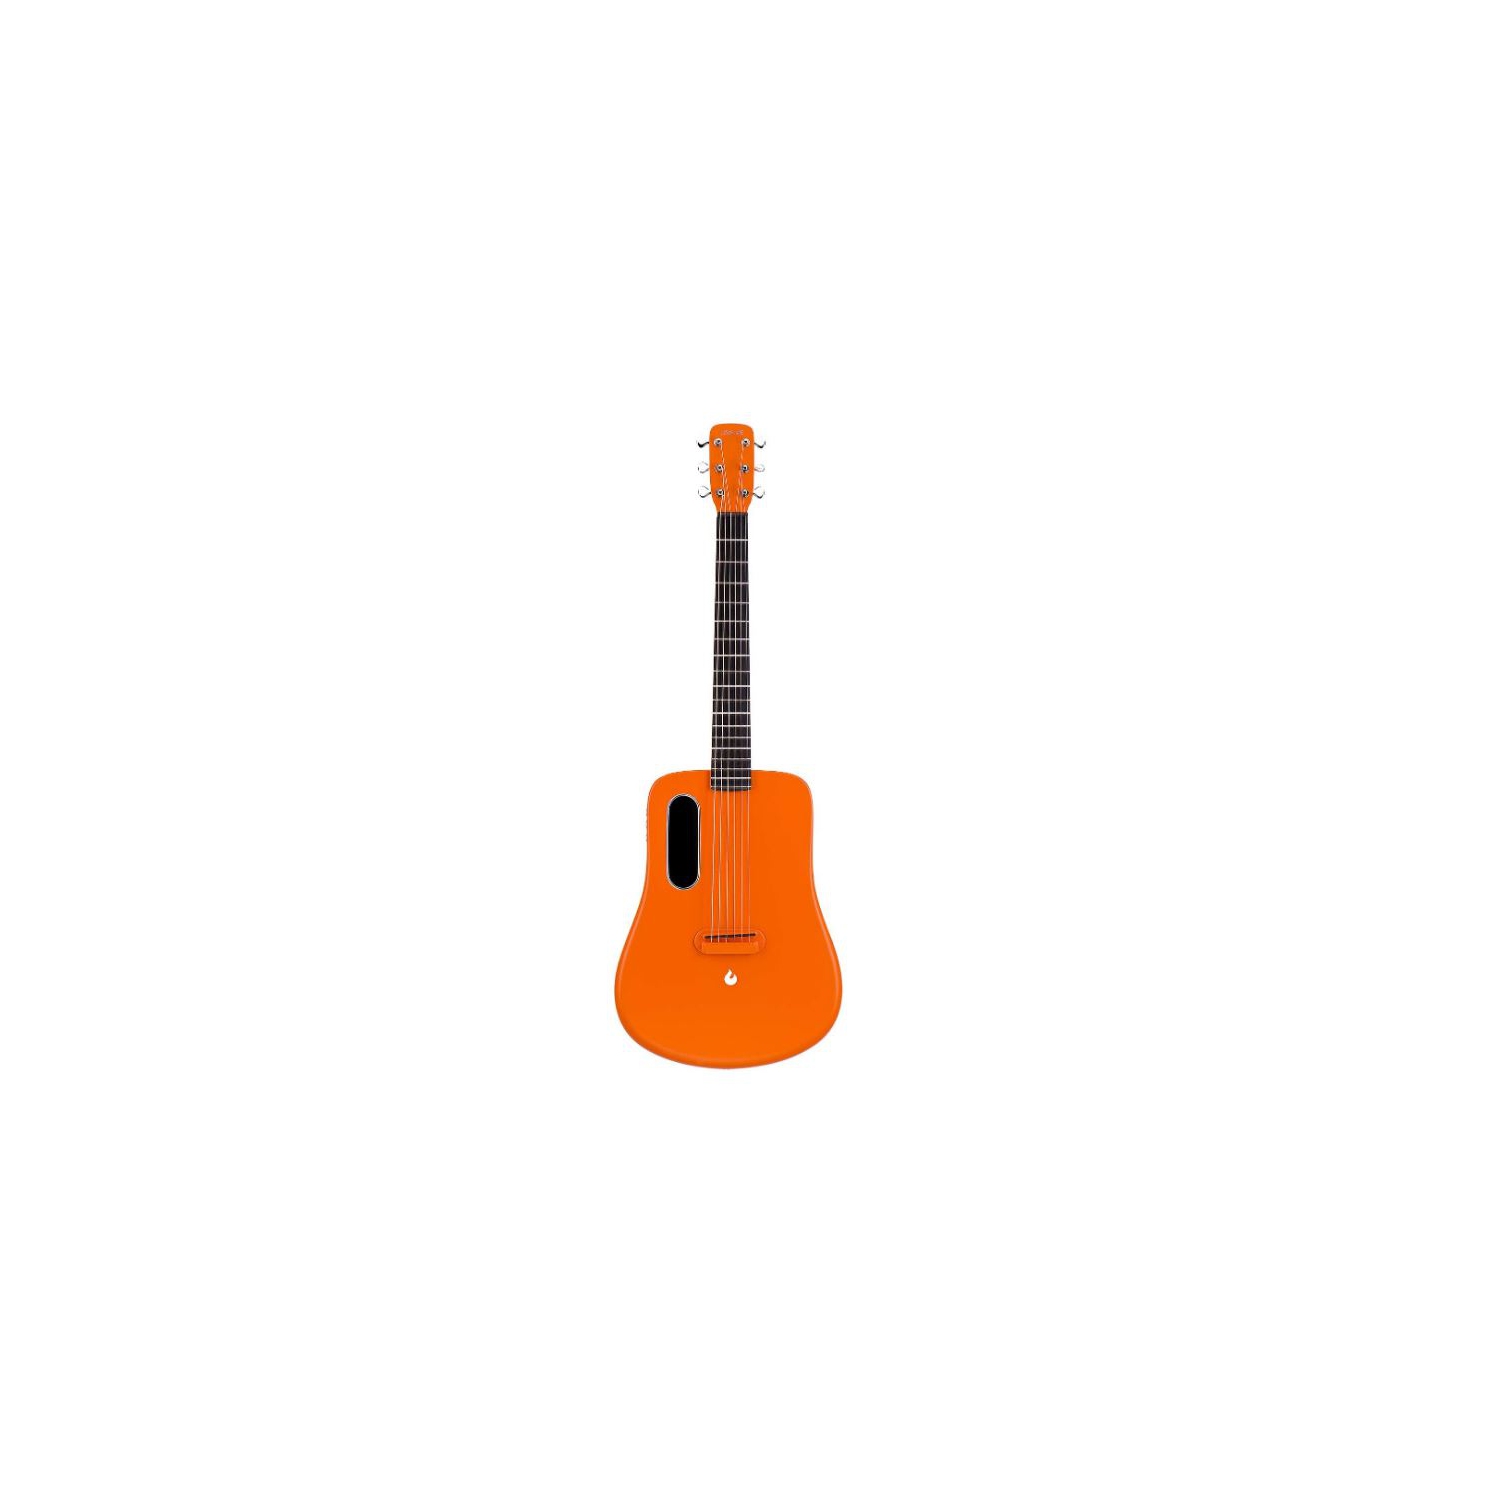 Open Box - LAVA ME 2 Carbon Fiber Guitar with Bag Picks and Charging Cable (Freeboost-Orange)